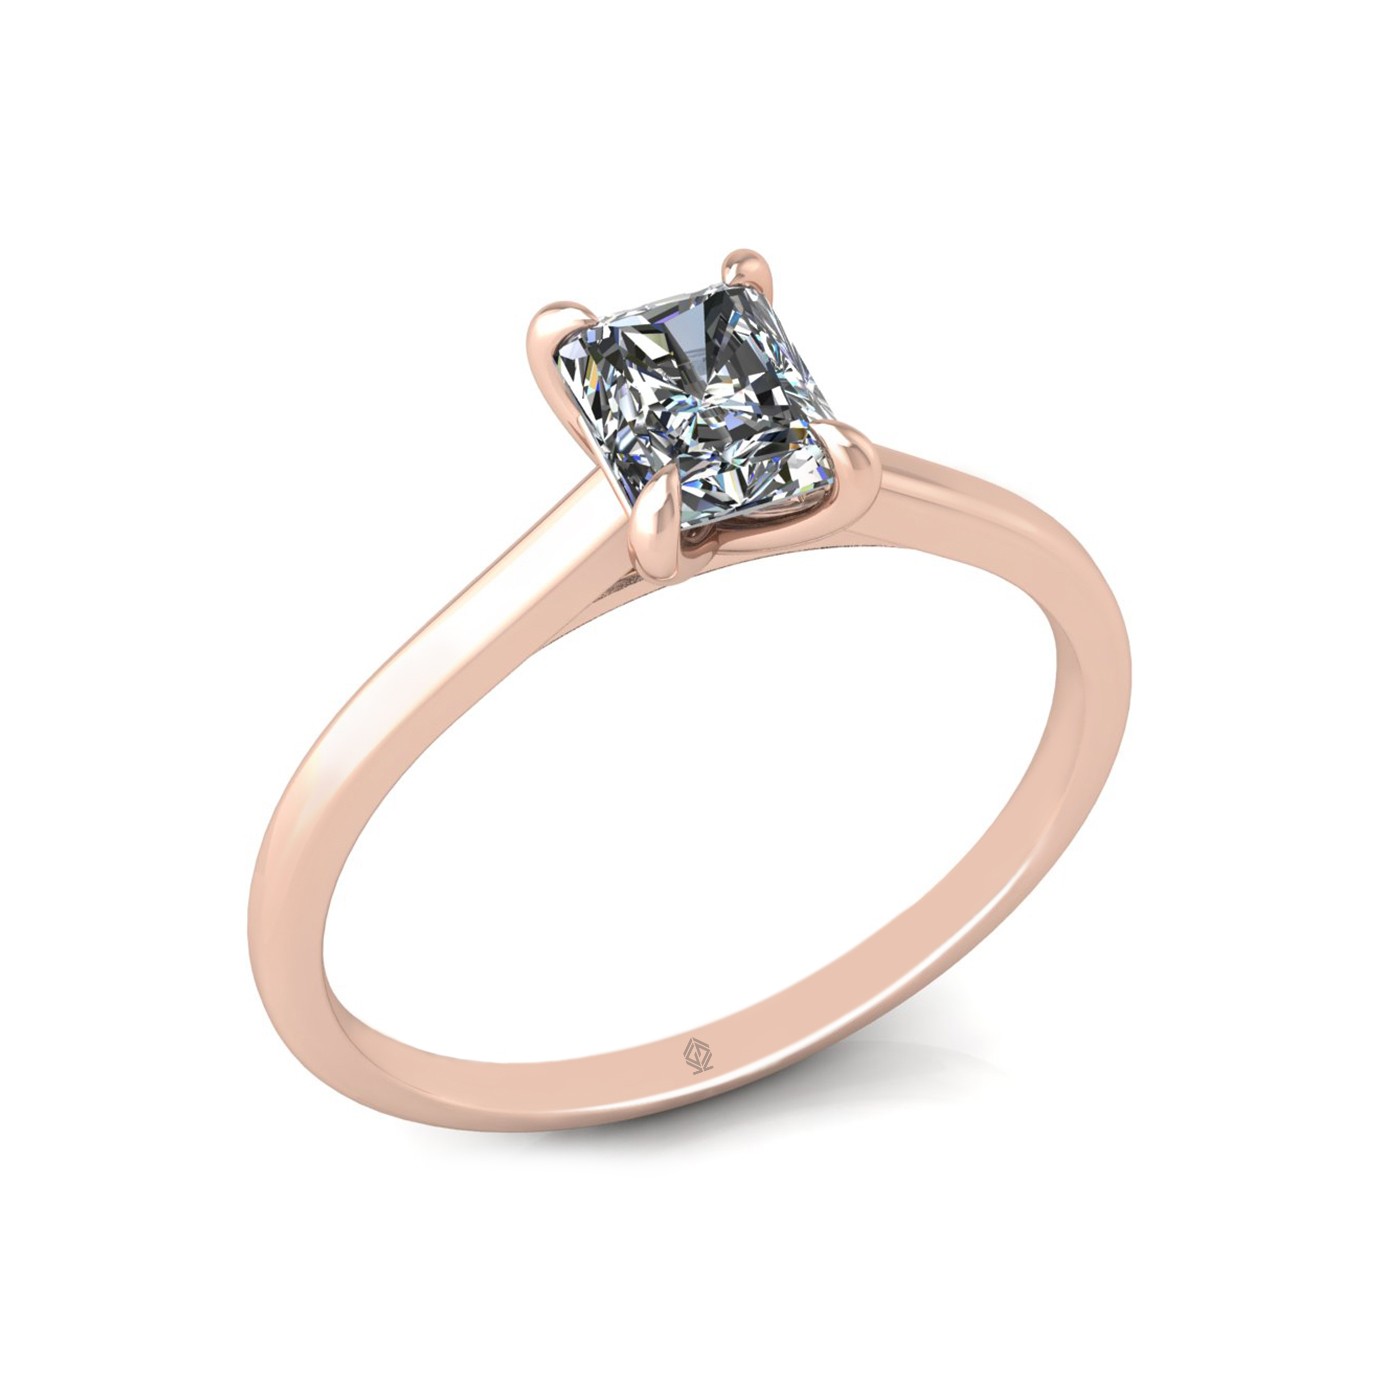 18k rose gold  0,80 ct 4 prongs solitaire radiant cut diamond engagement ring with whisper thin band